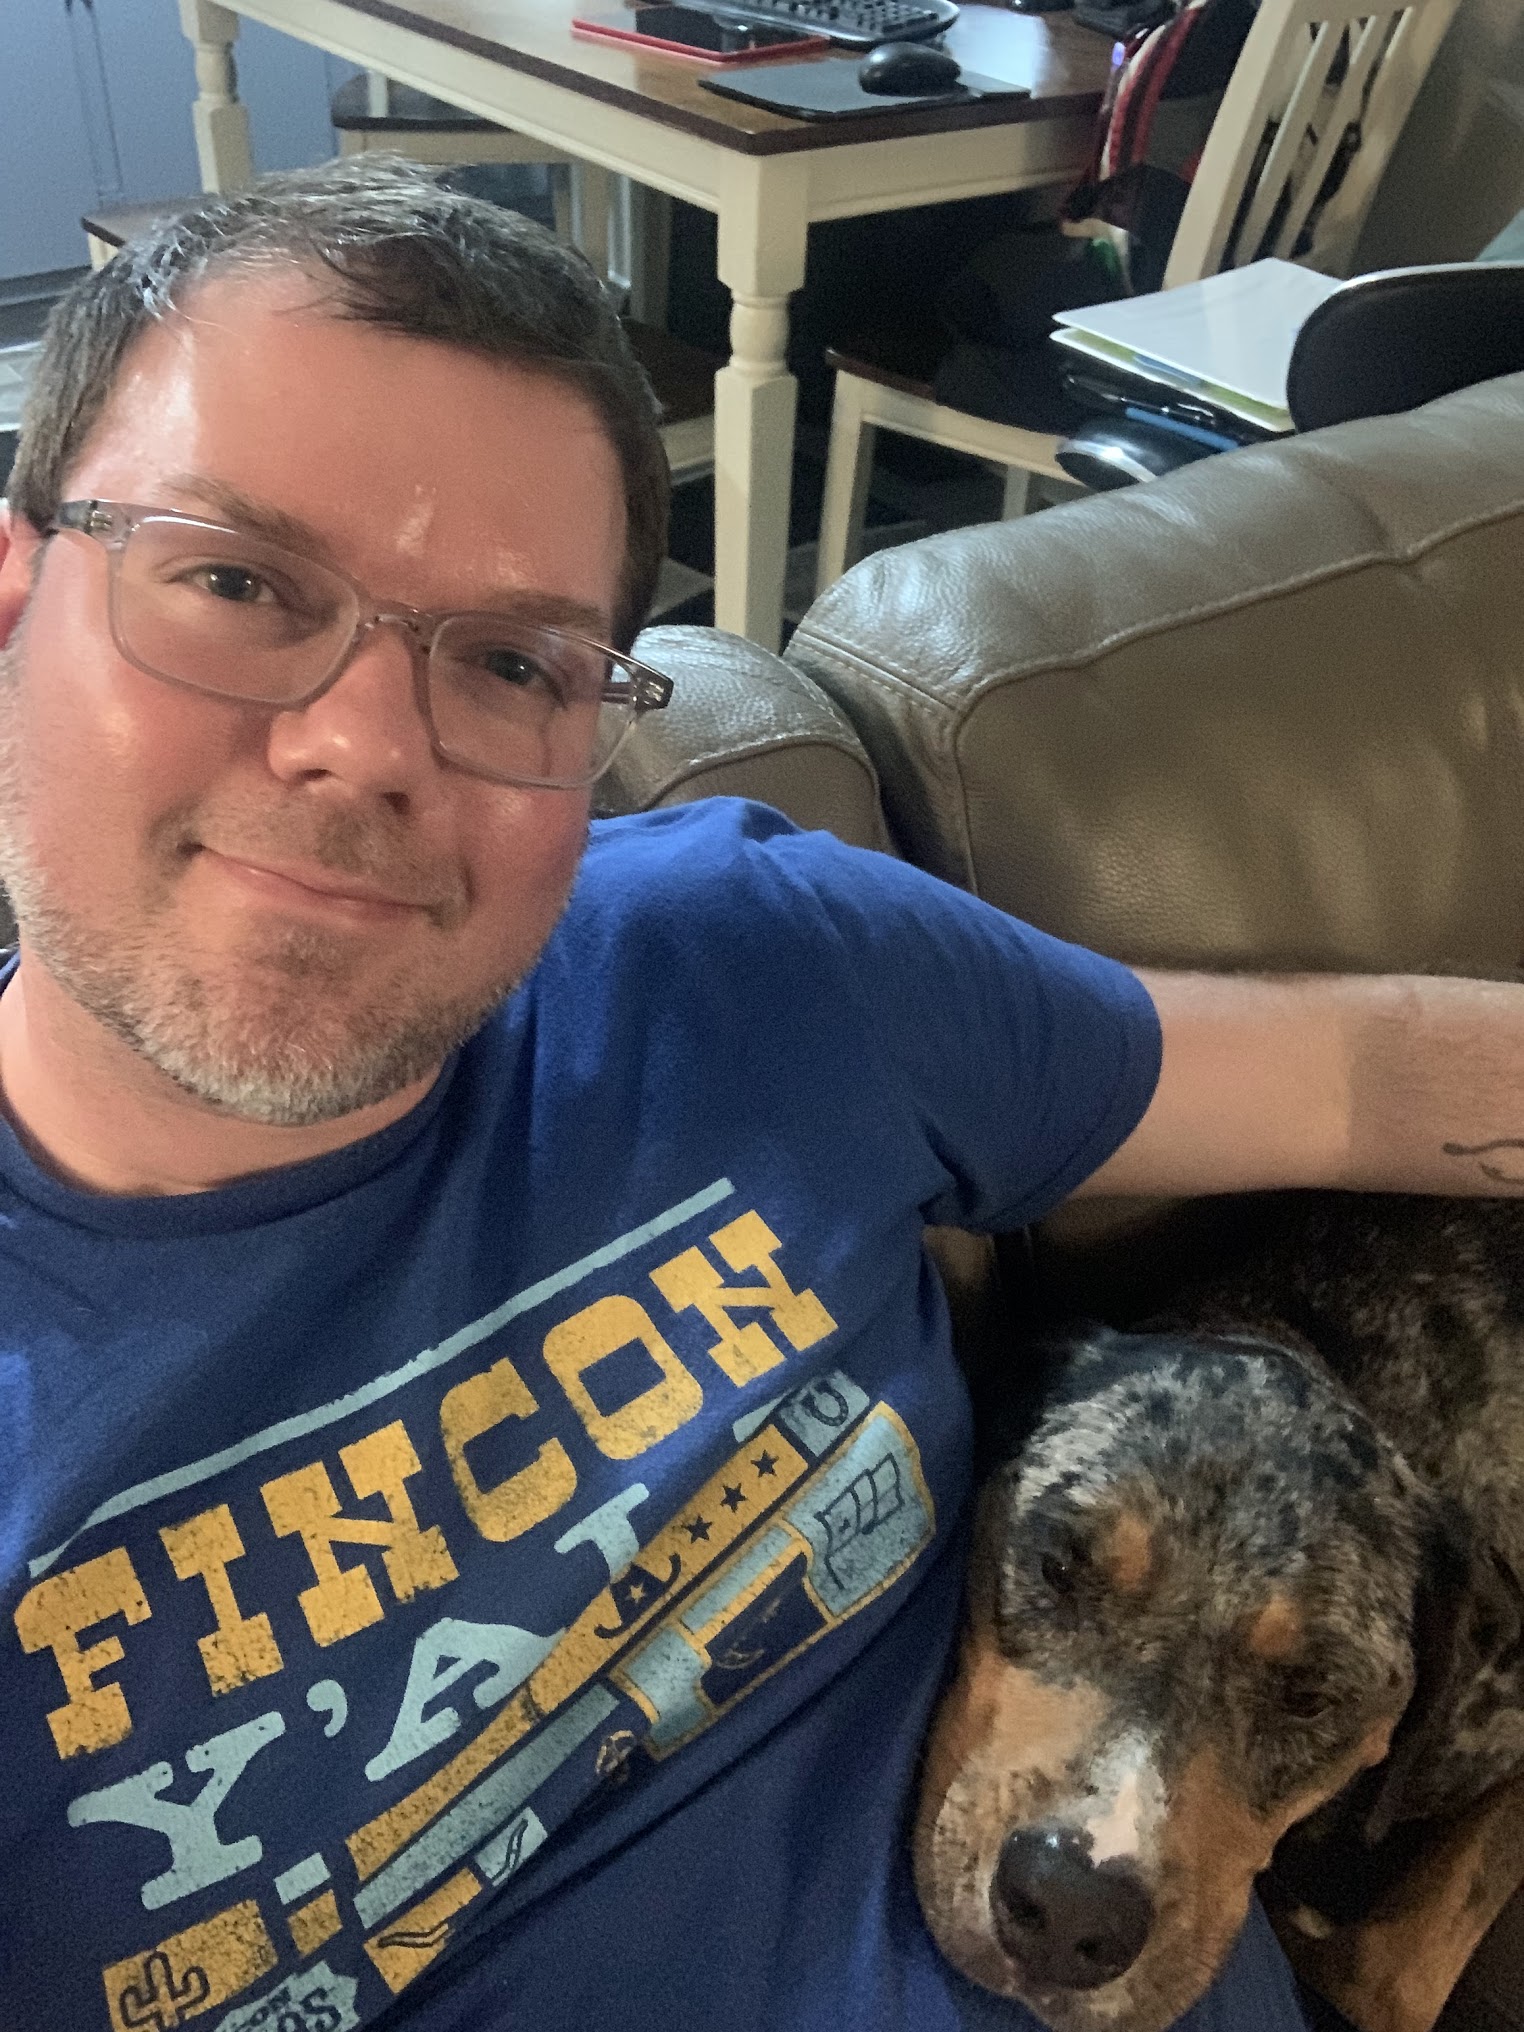 a man with glasses and a dog on a couch